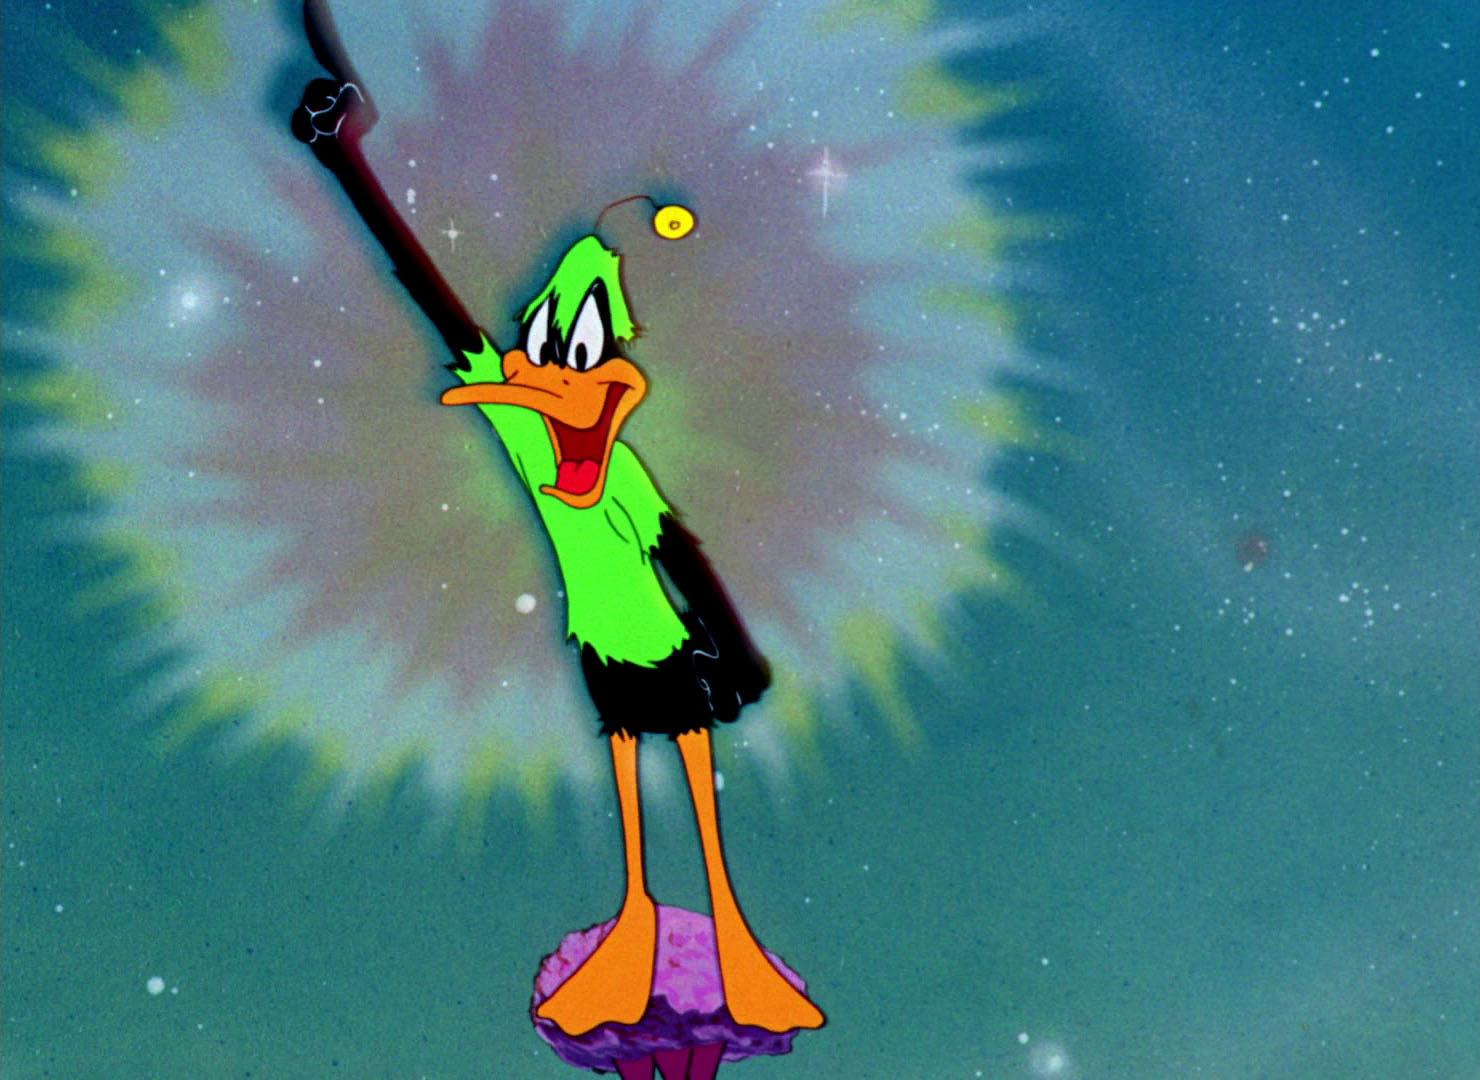 Duck Dodgers in the 24th 1/2 Century.